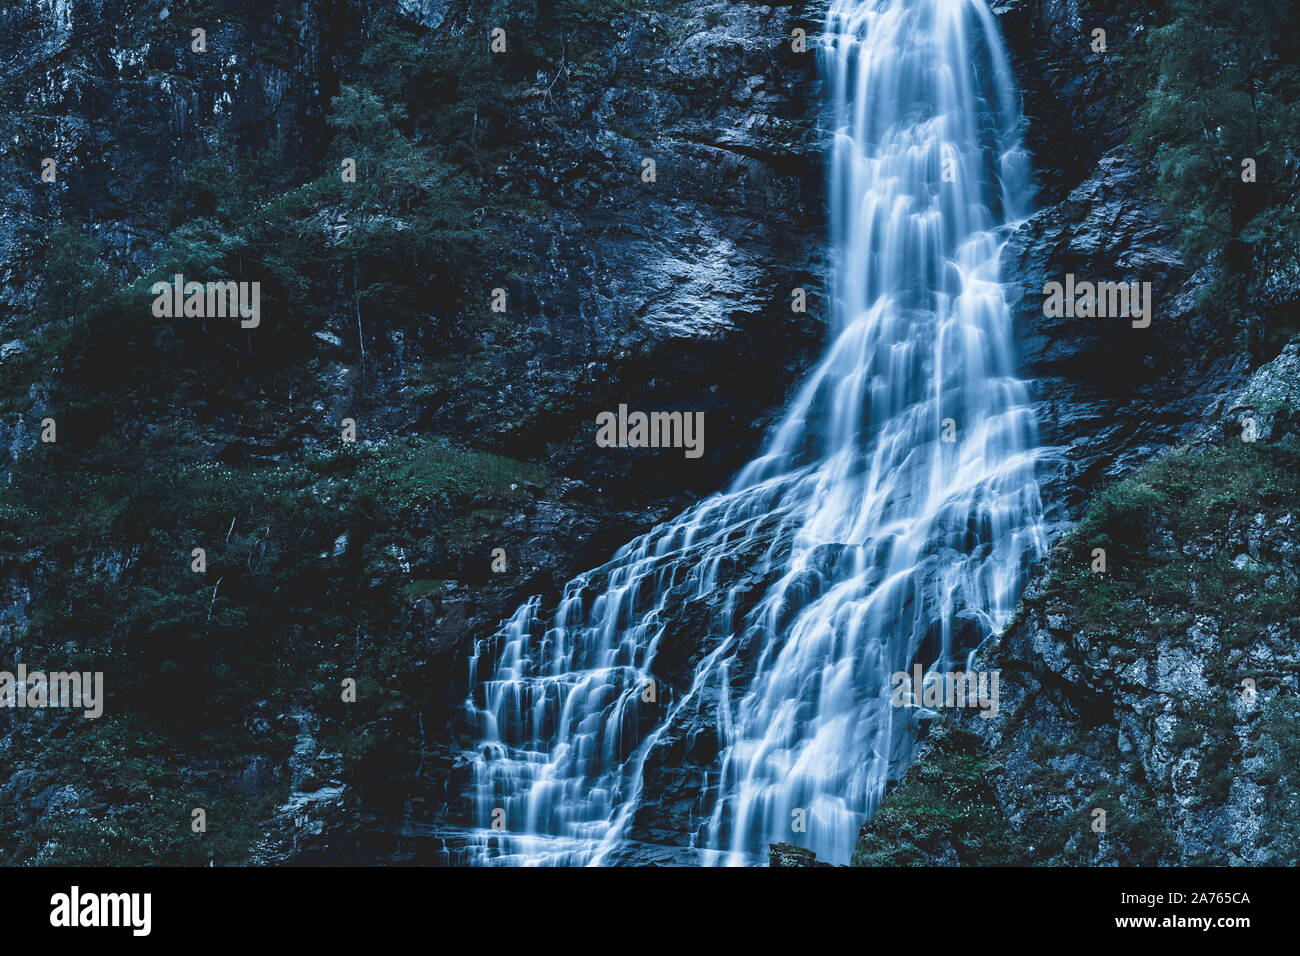 Glowing waterfall on a rocky mountainside covered in green bushes Stock Photo